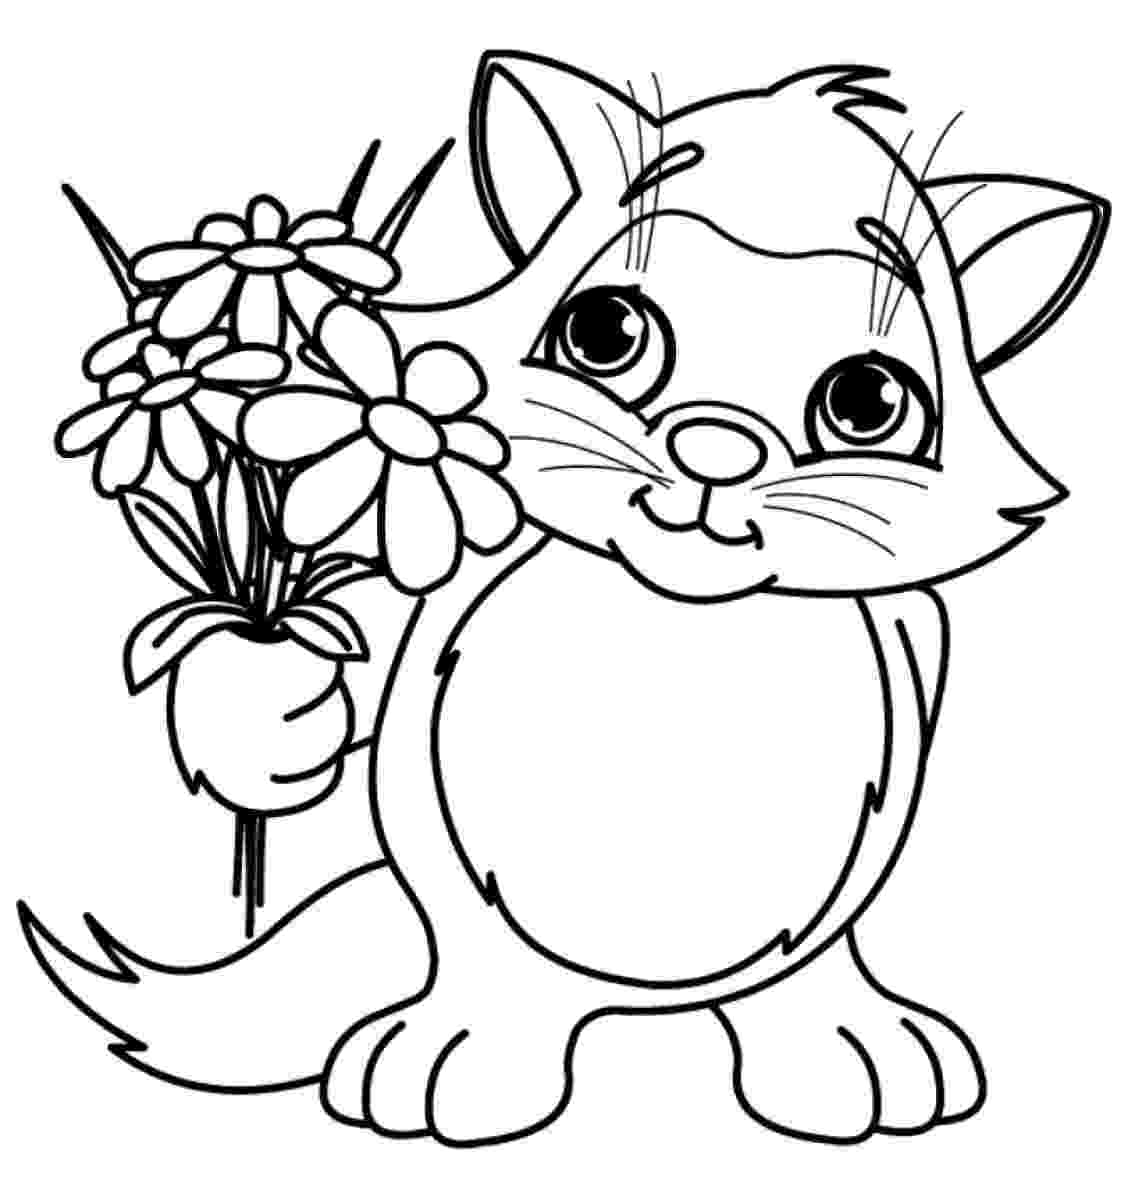 flower coloring sheets for kids free printable flower coloring pages for kids best sheets flower for kids coloring 